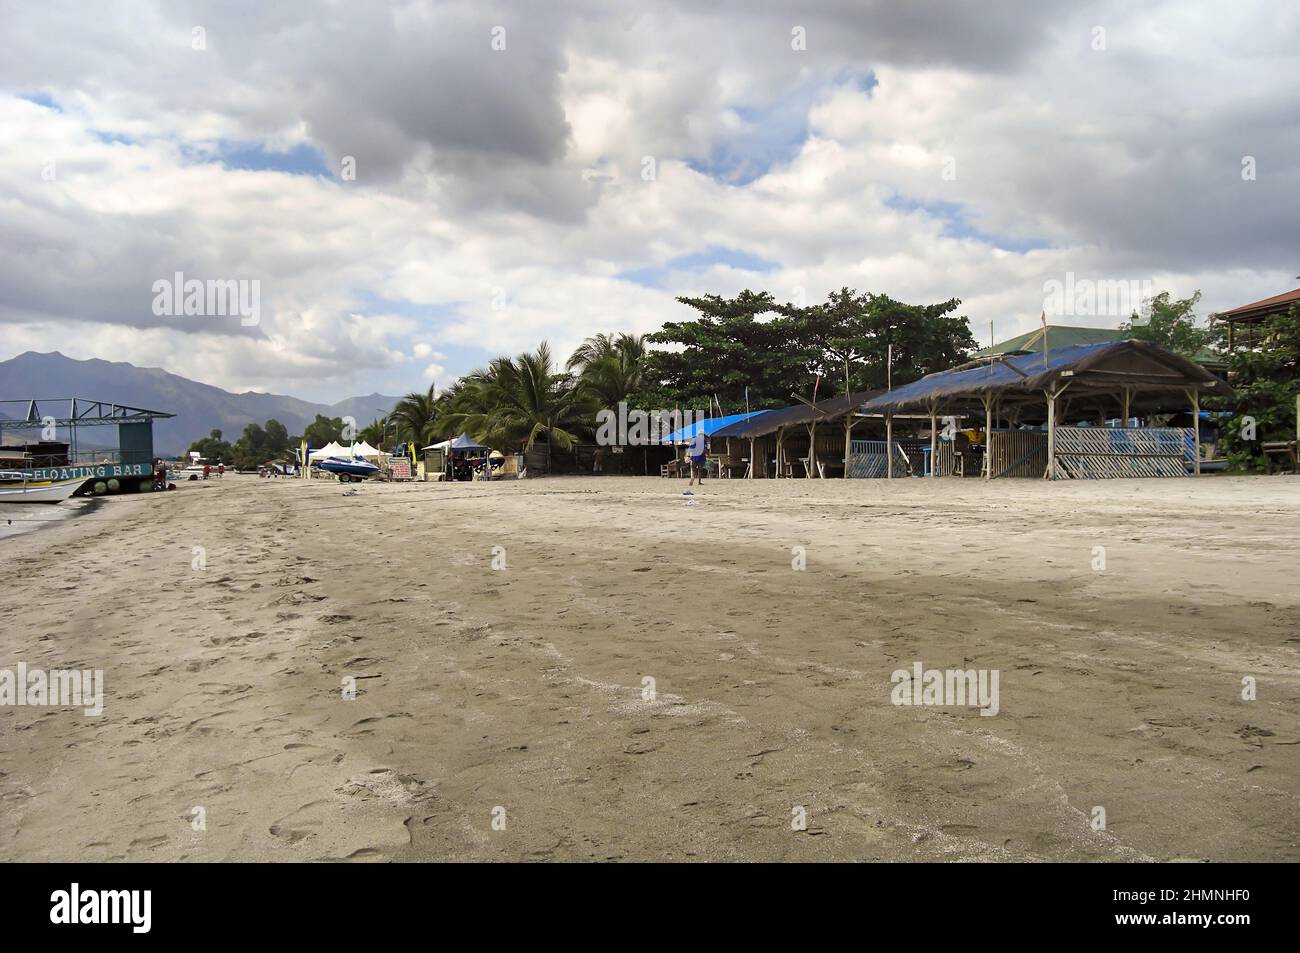 Subic beach at the coast in Olongaipo on the Philippines December 6, 2011 Stock Photo